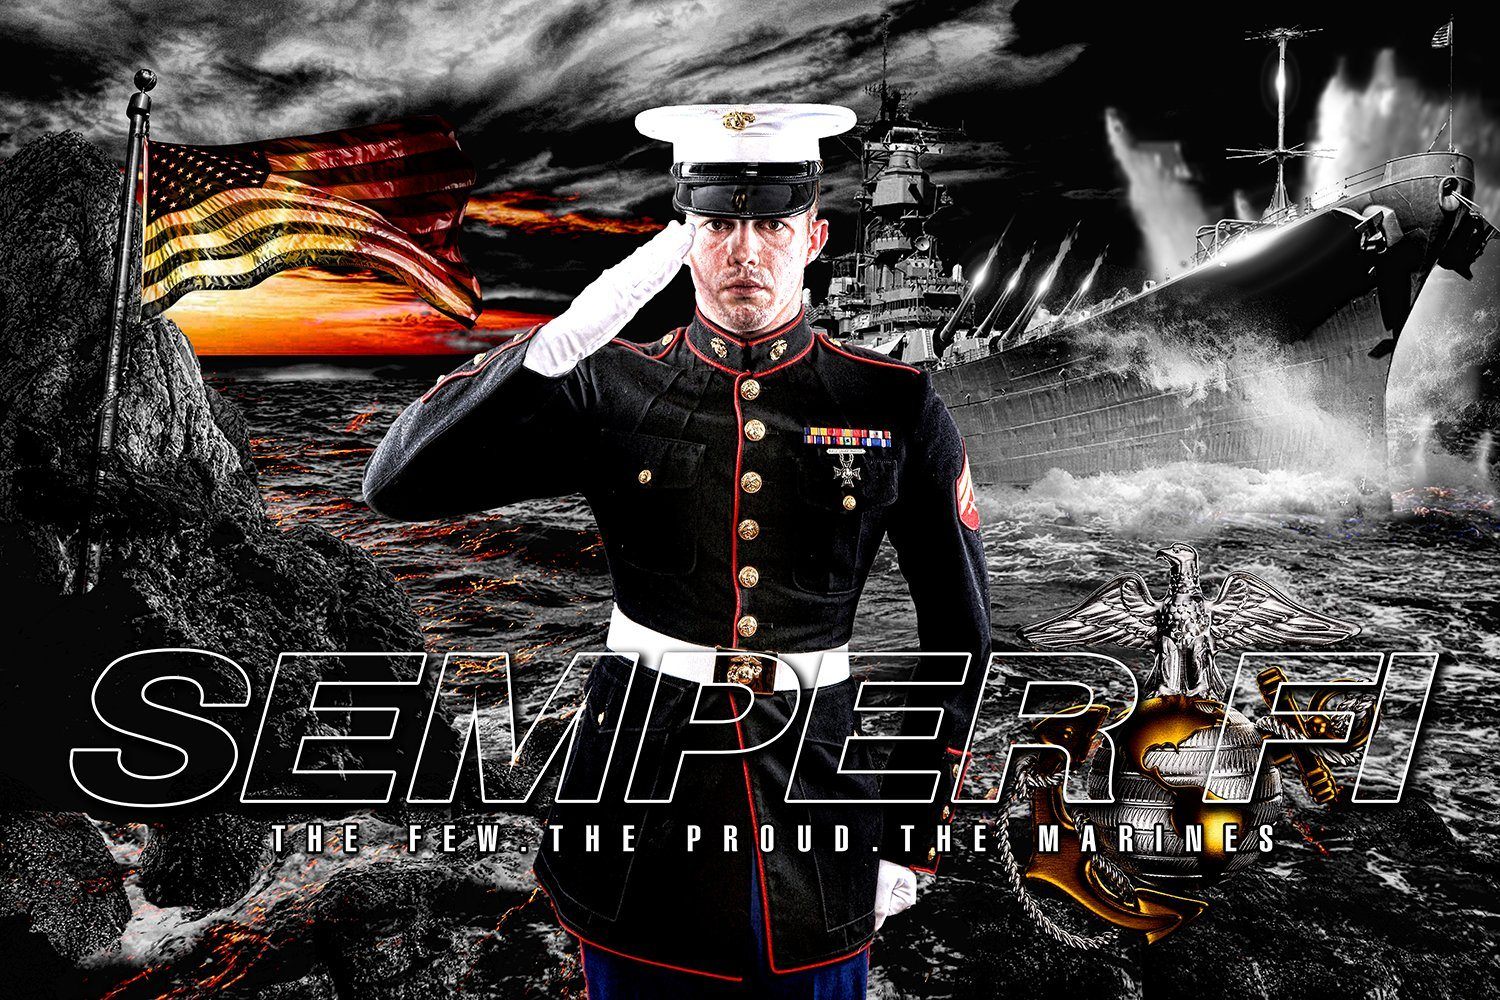 Marine/Navy - V.1 - Heroes Series - Poster/Banner H-Photoshop Template - Photo Solutions